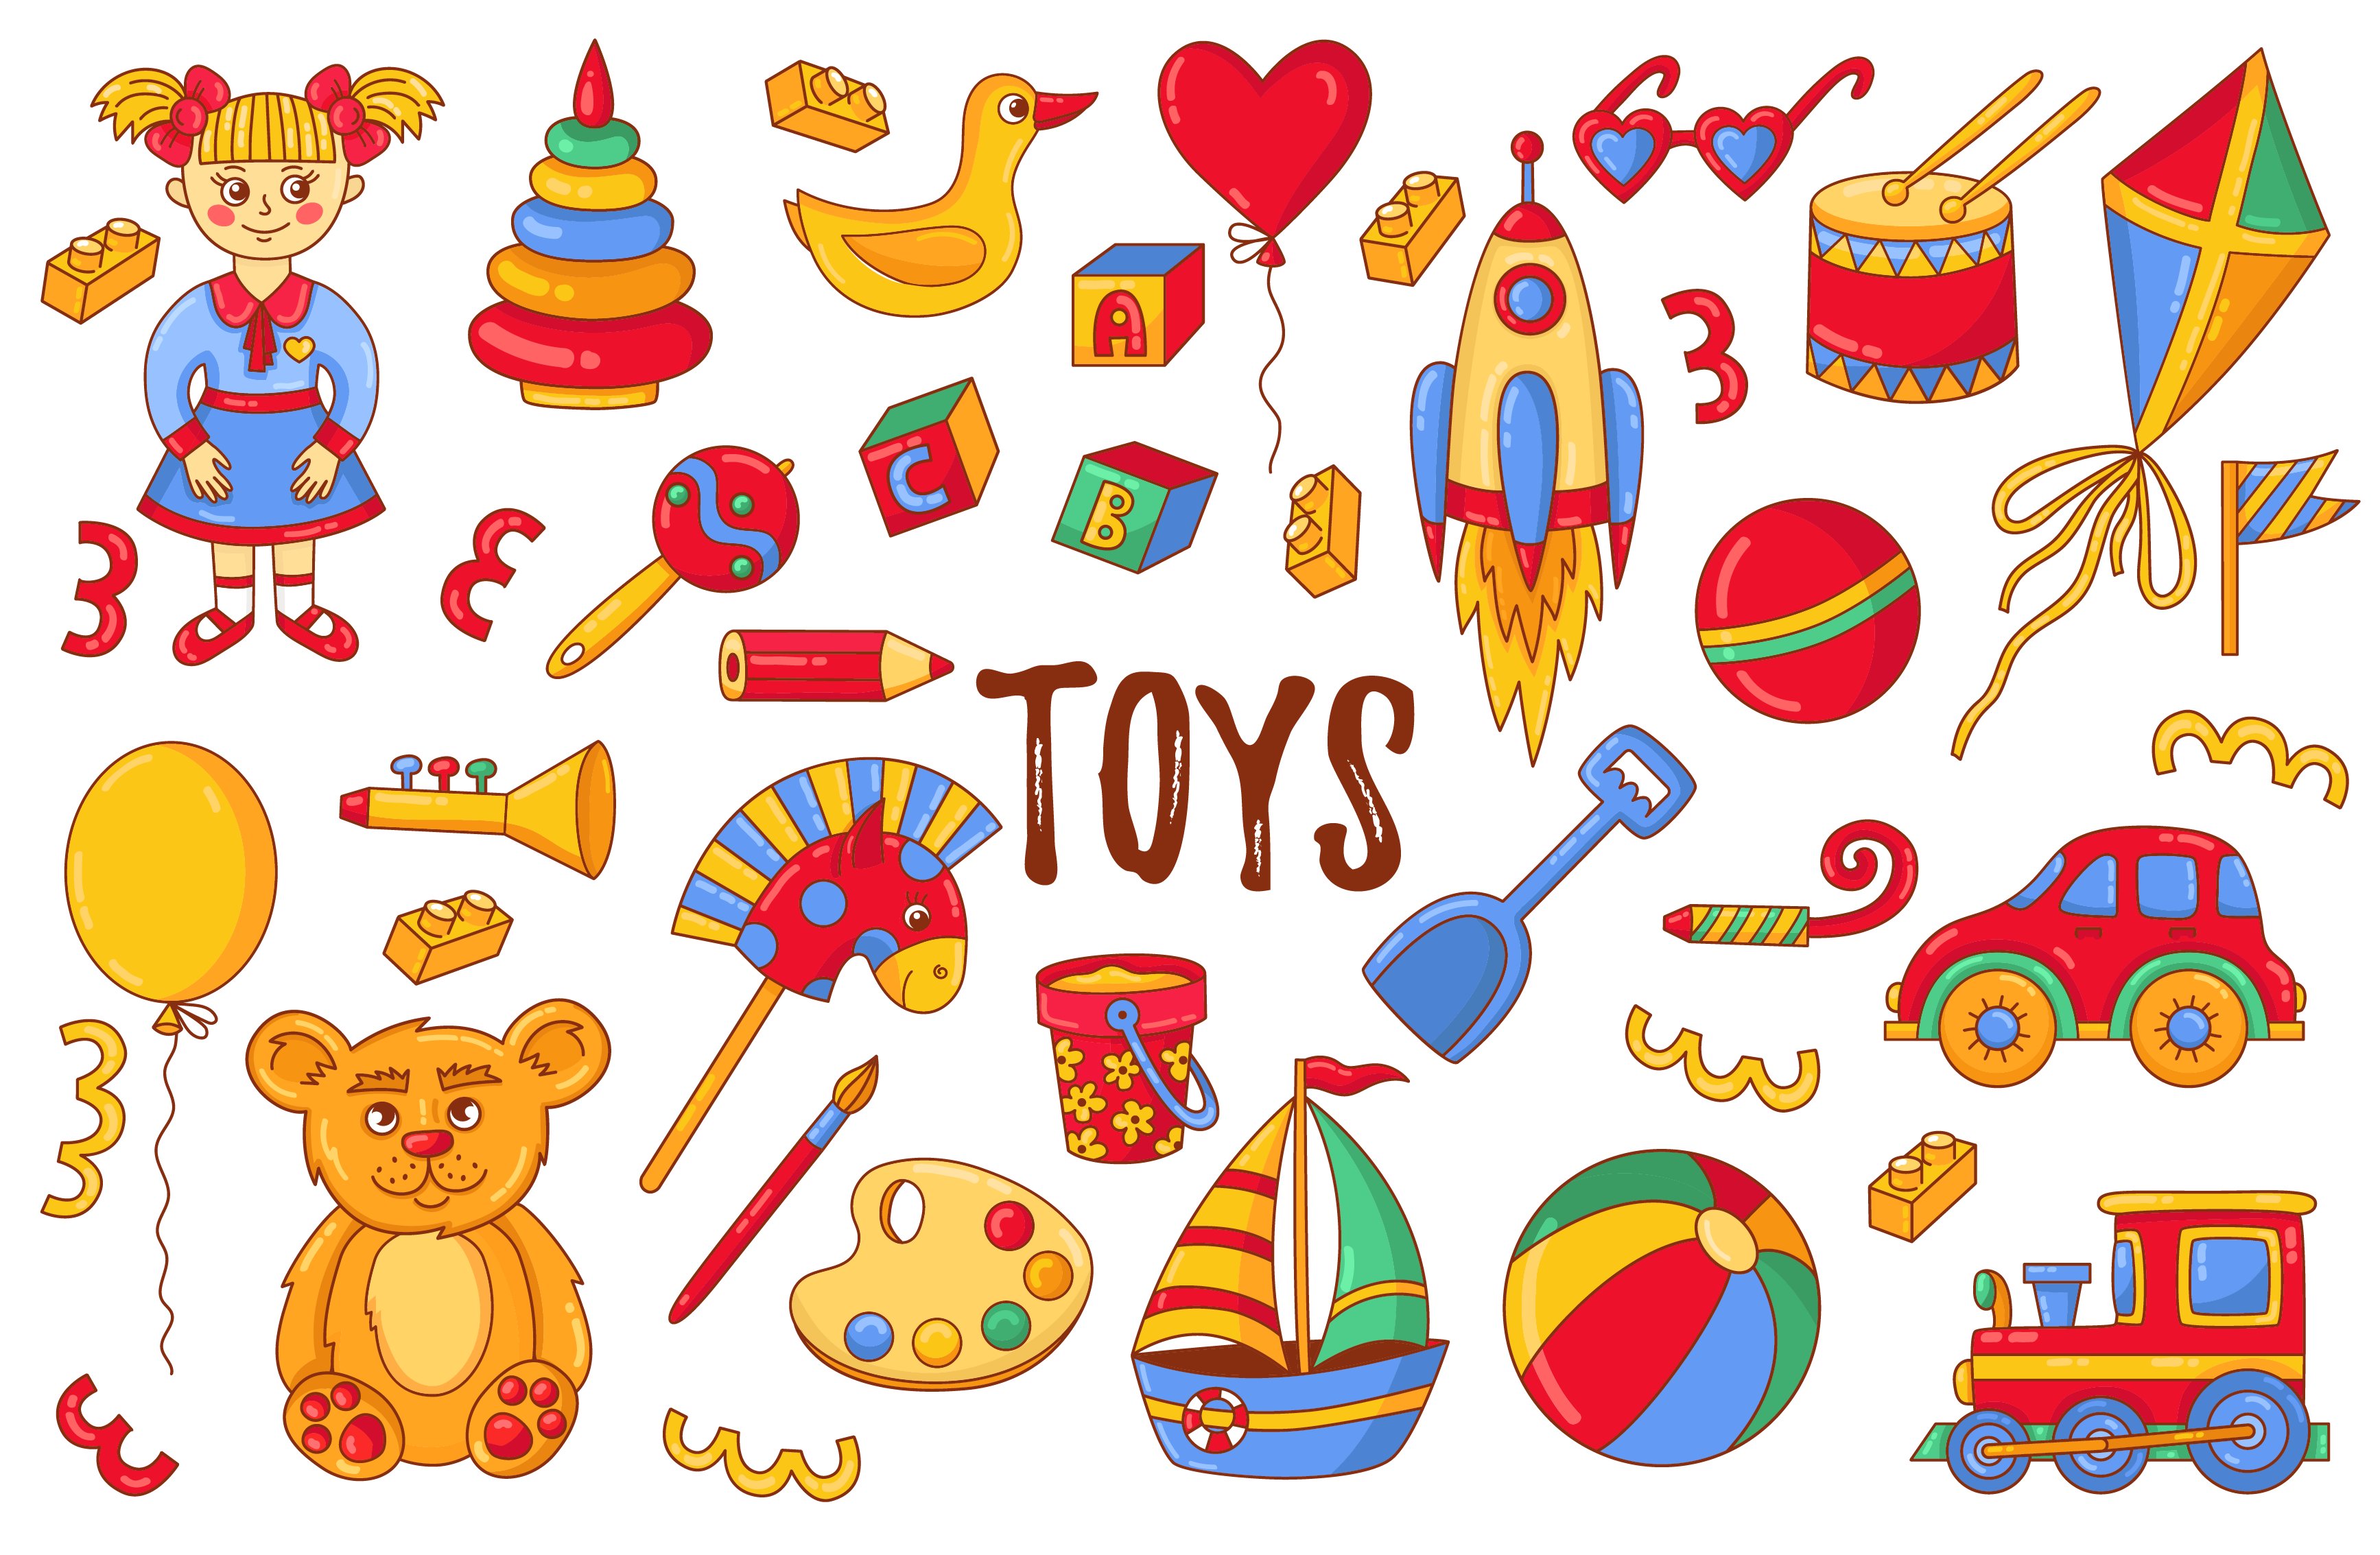 Toys cartoon vector icons set cover image.